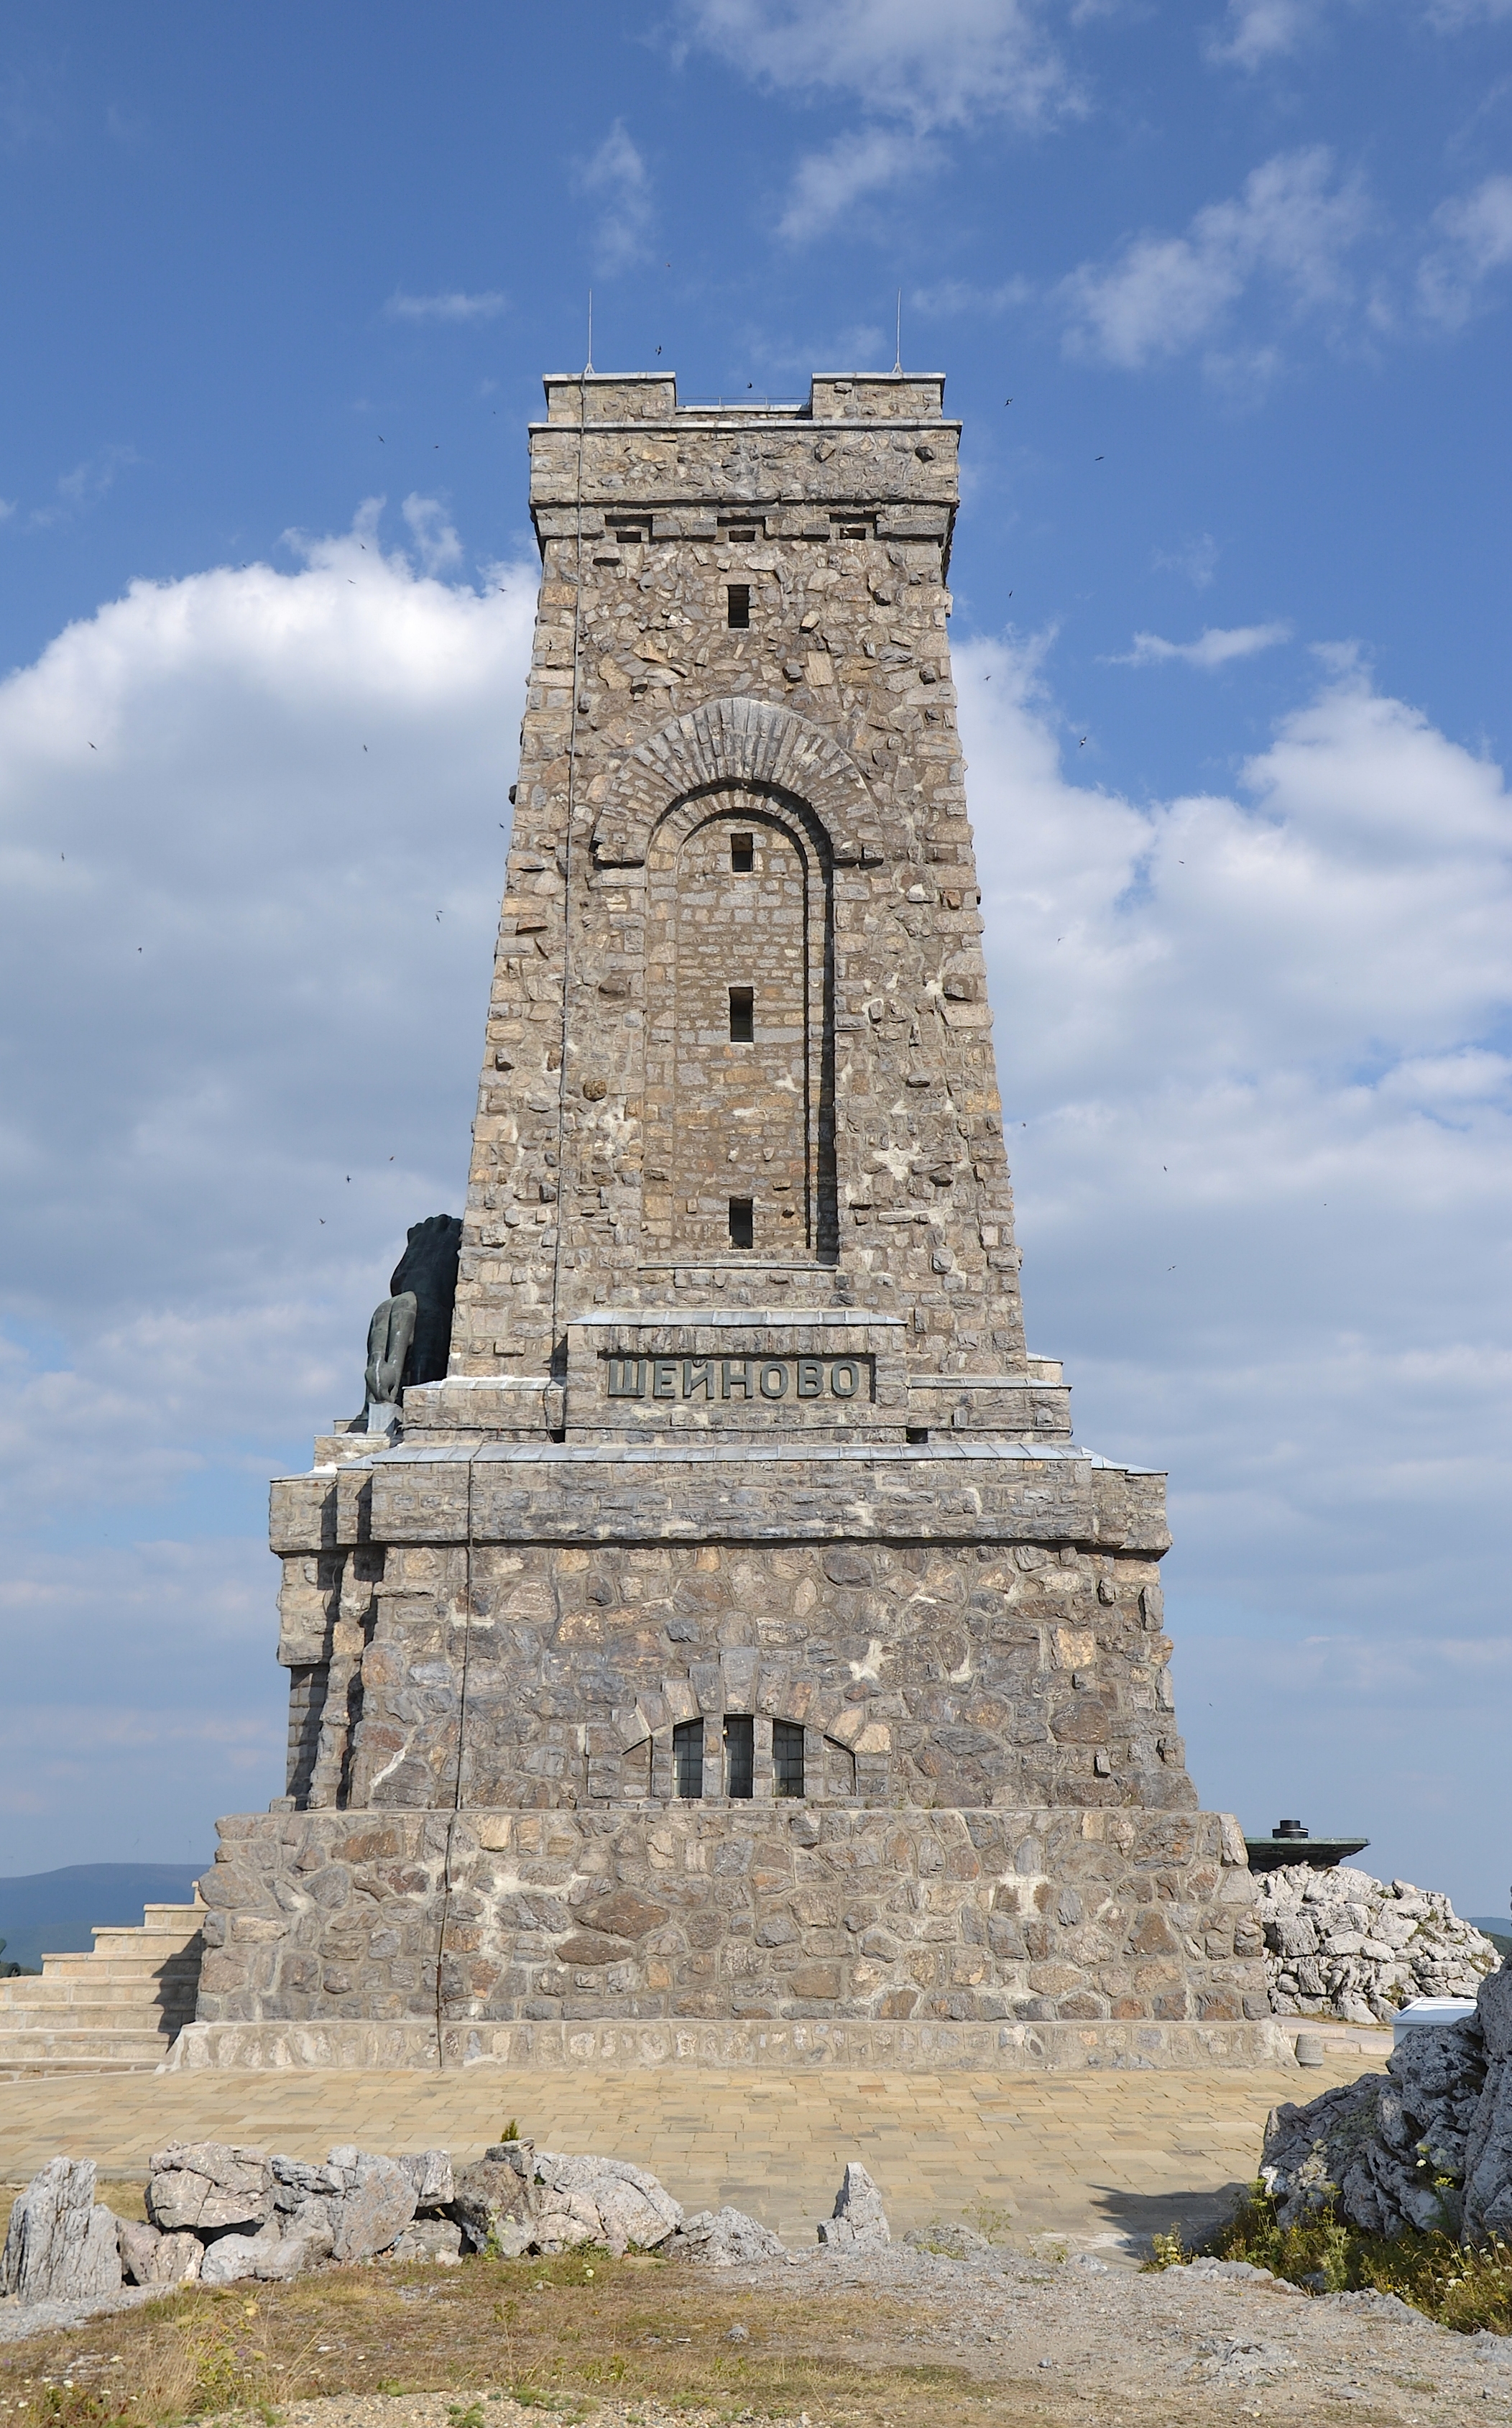 Shipka pass (Шипка) - central Monument 2